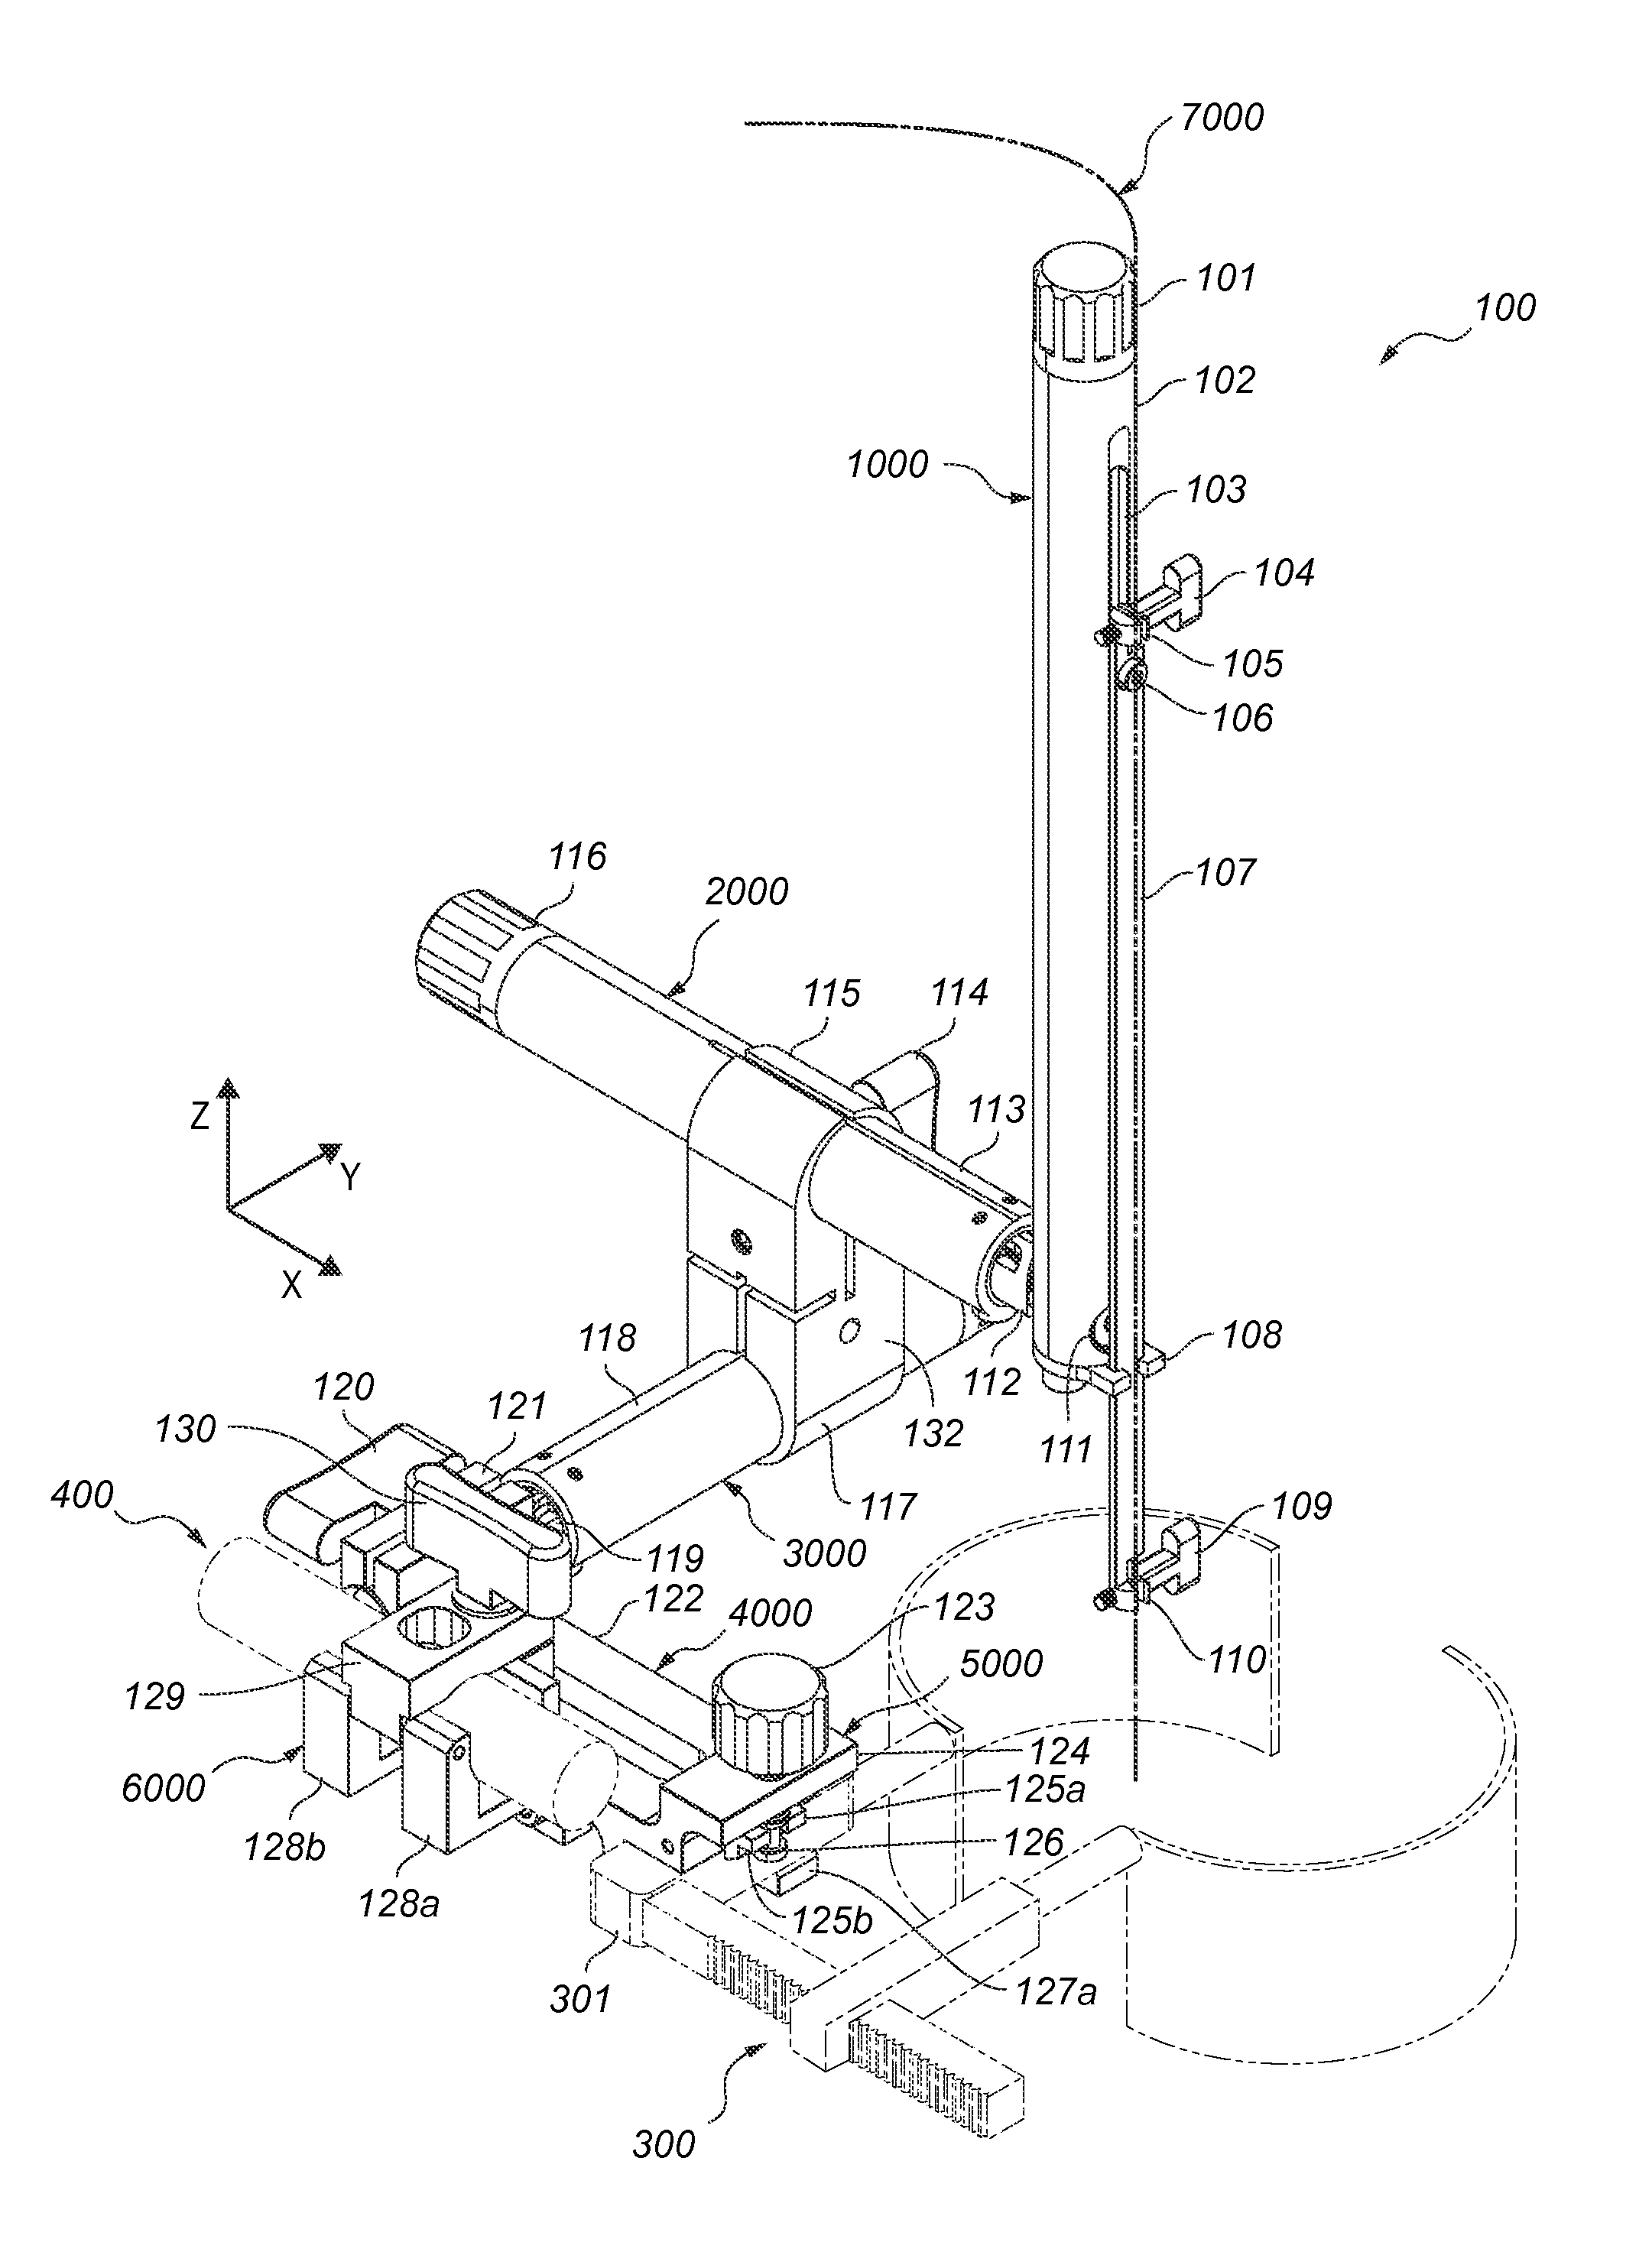 Stabilization apparatuses and methods for medical procedures